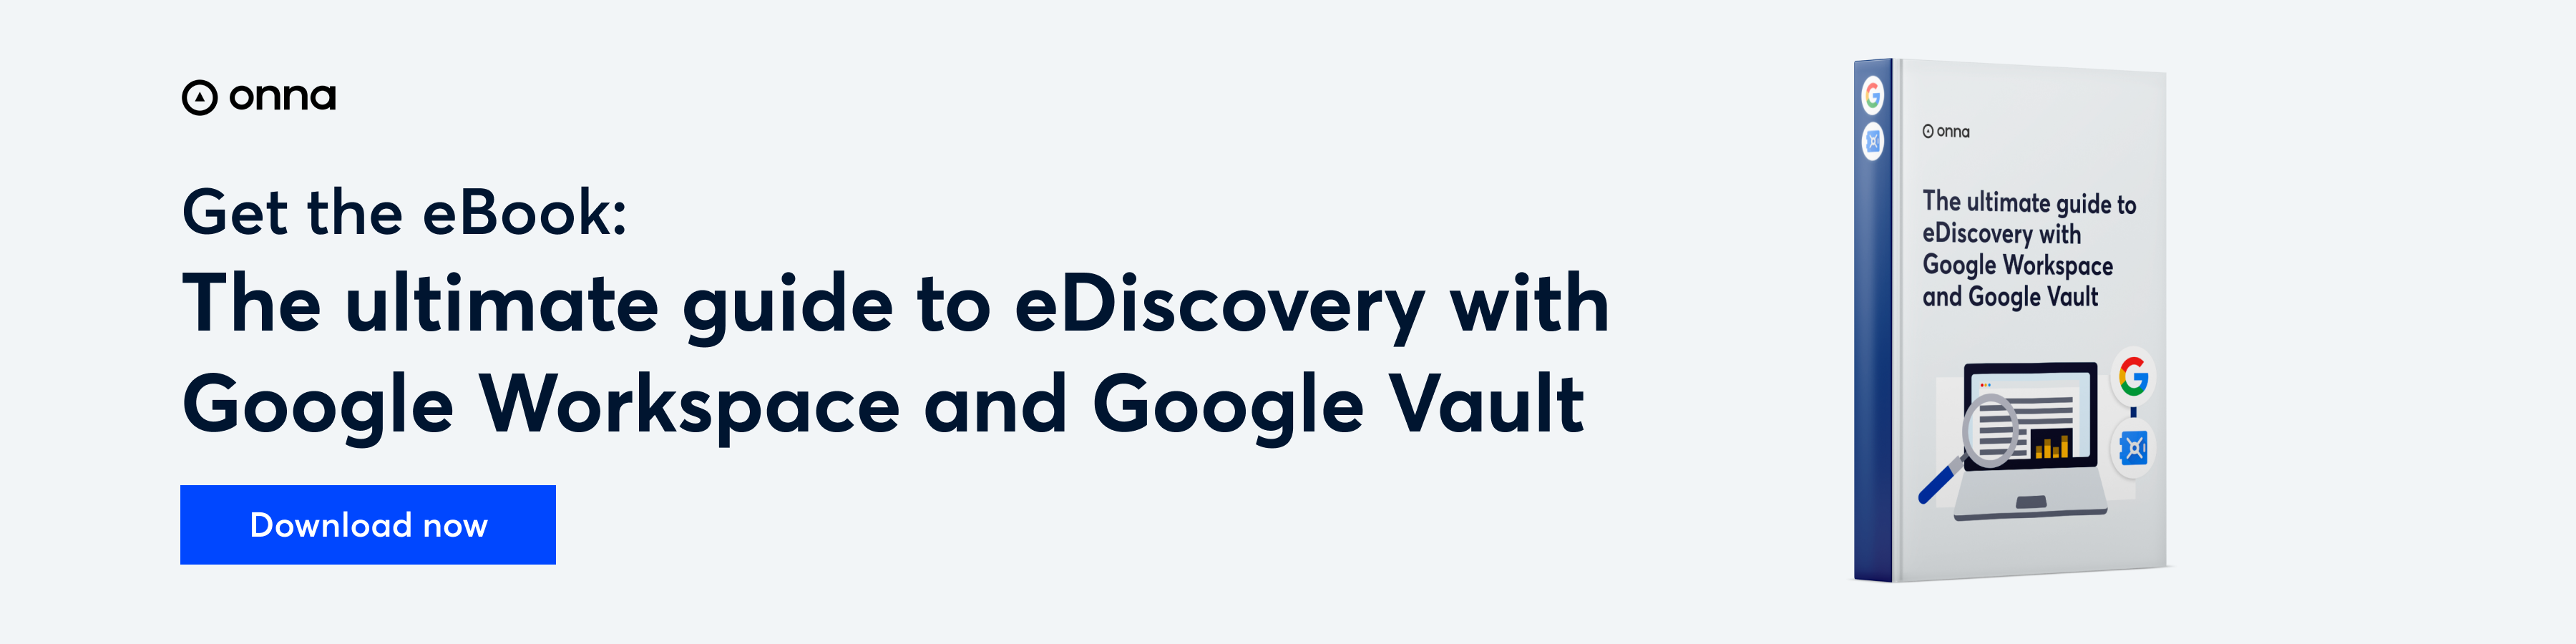 blog-image-google-ediscovery-guide-banner